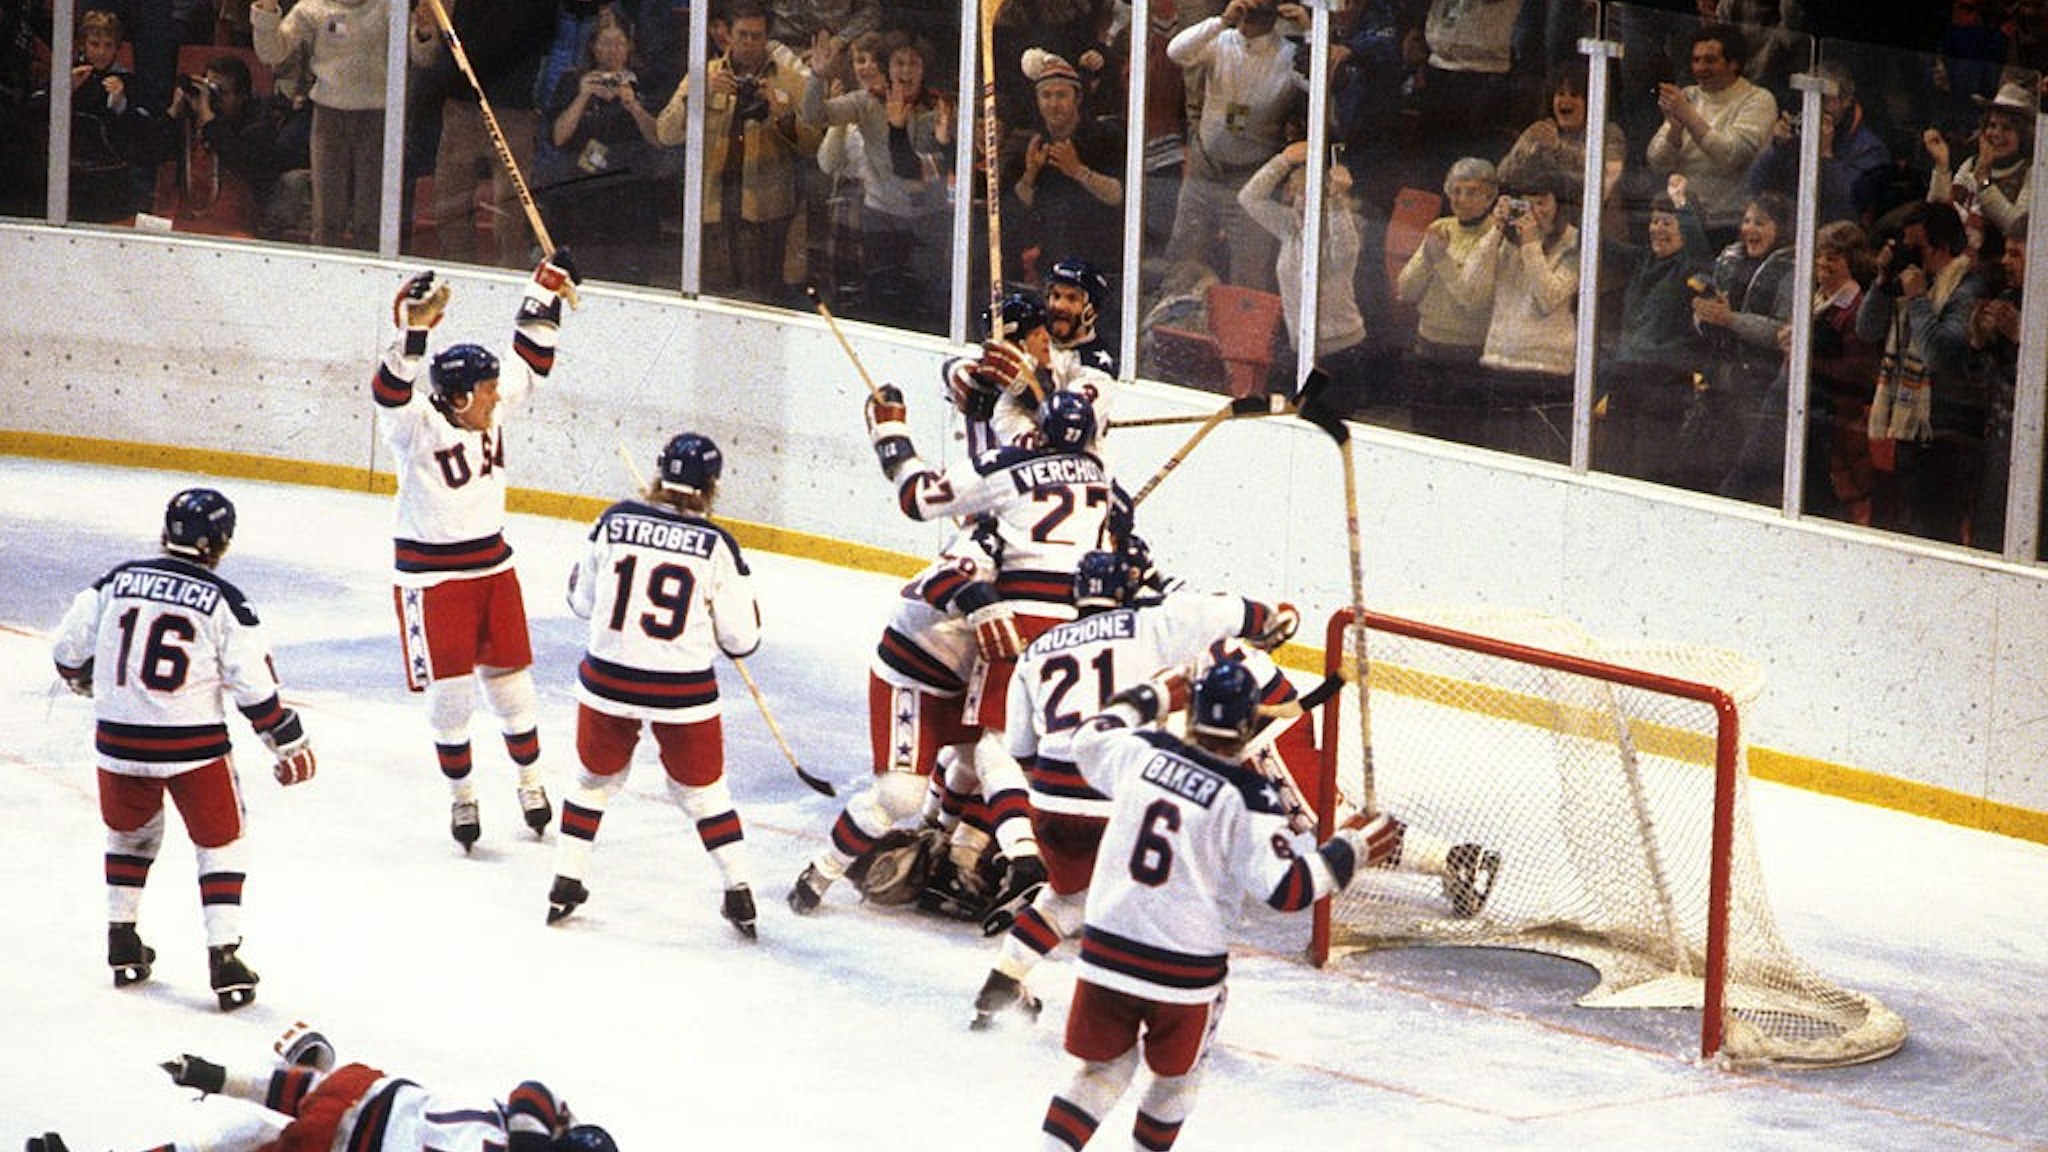 Hockey: 1980 Winter Olympics: Overall view of Team USA players victorious on ice after winning Medal Round game vs USSR at Olympic Fieldhouse in the Olympic Center. Miracle on Ice. Lake Placid, NY 2/22/1980 CREDIT: Heinz Kluetmeier (Photo by